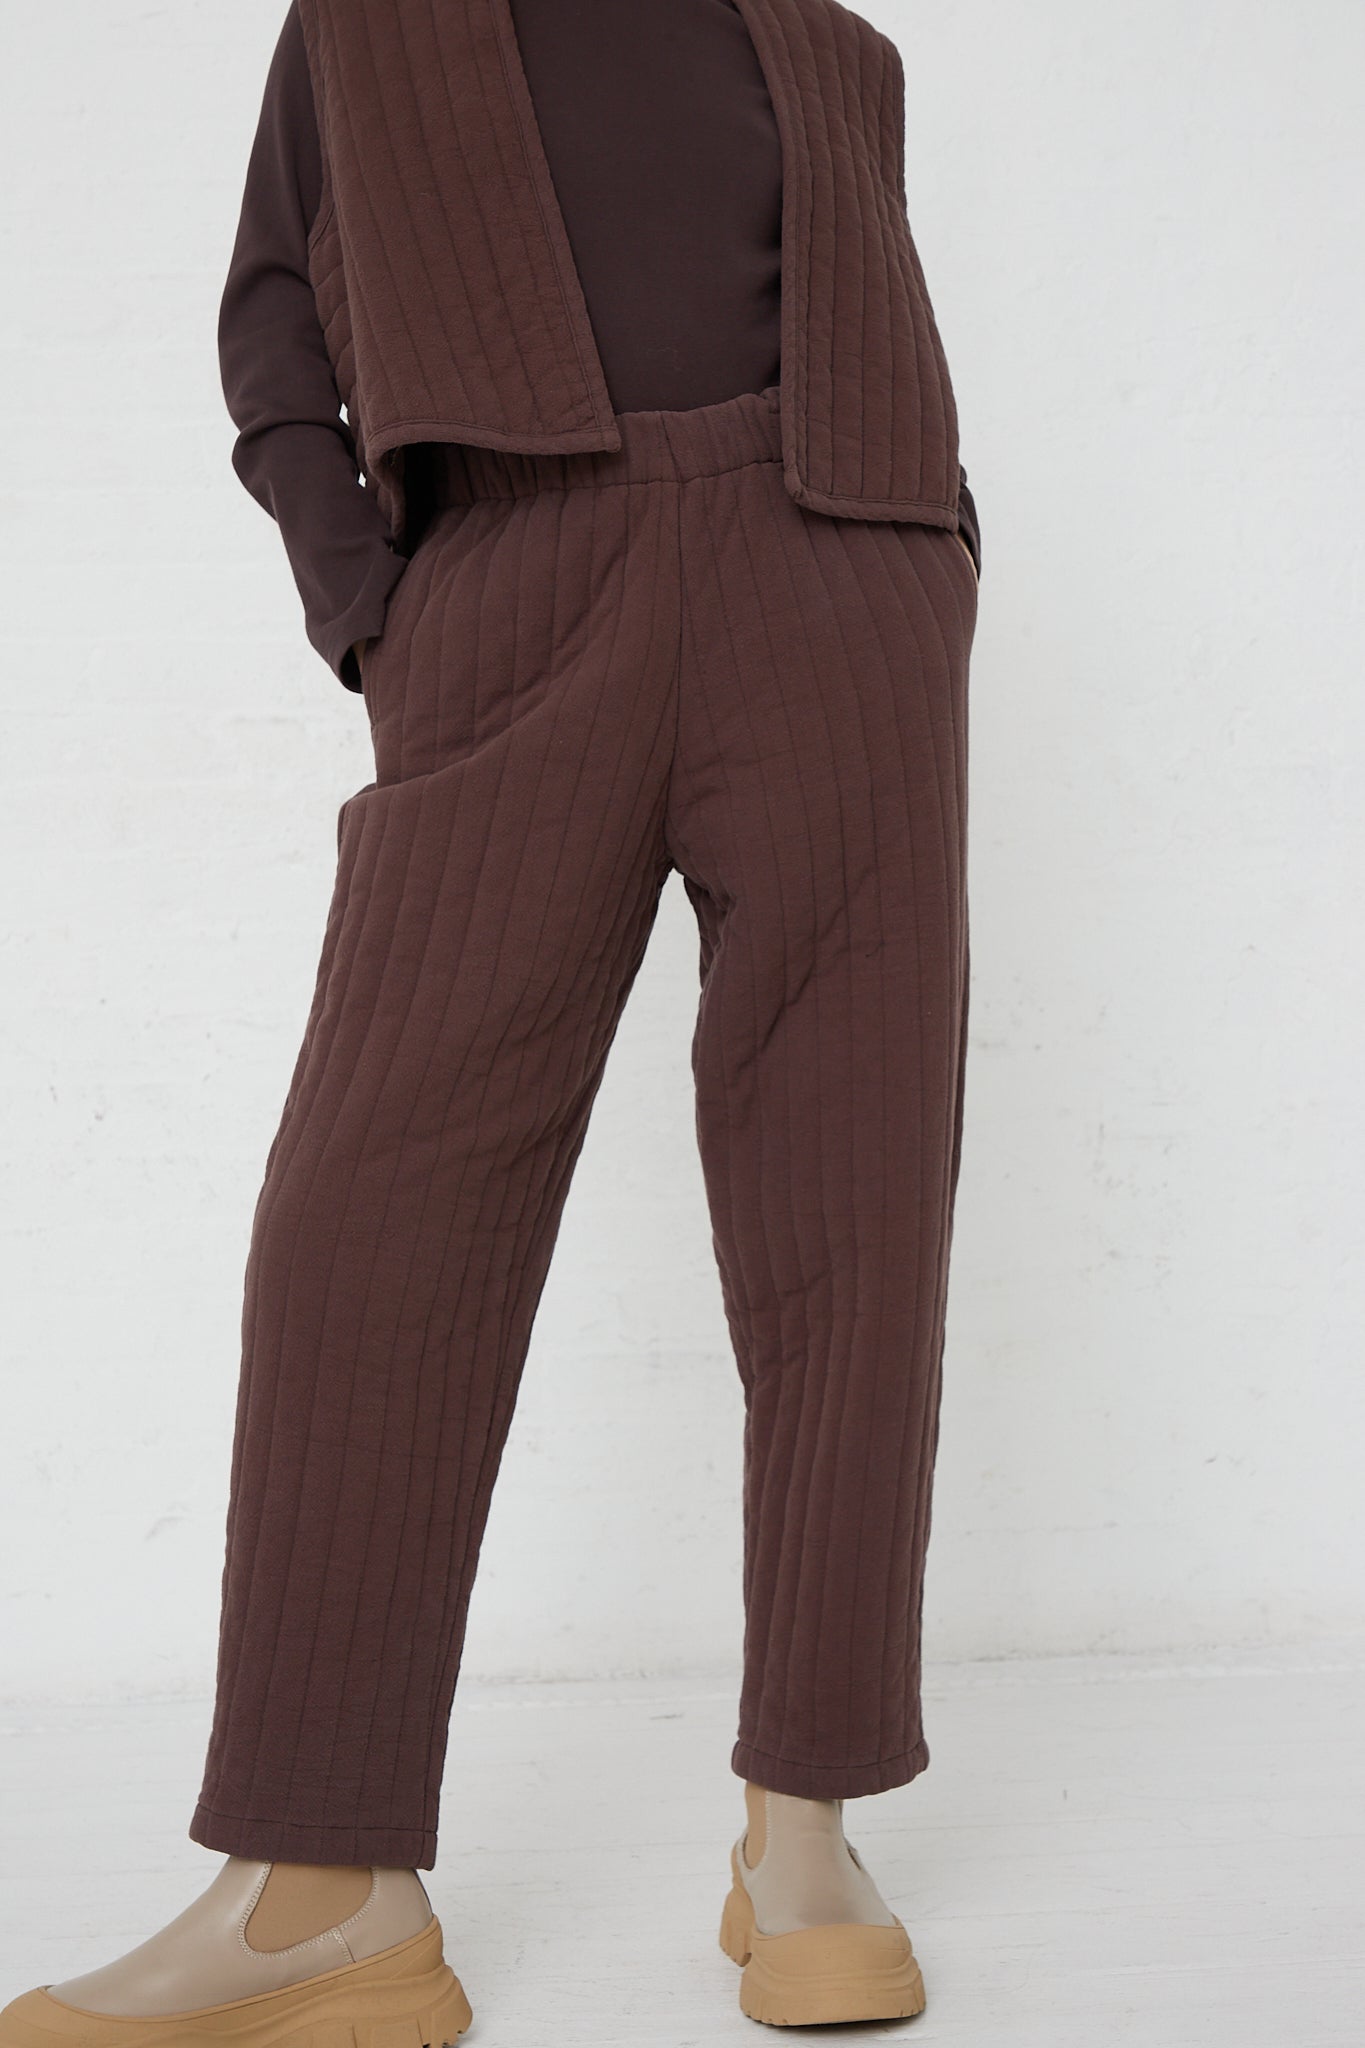 A woman wearing Black Crane's Quilted Easy Pants in Plum made of woven cotton.